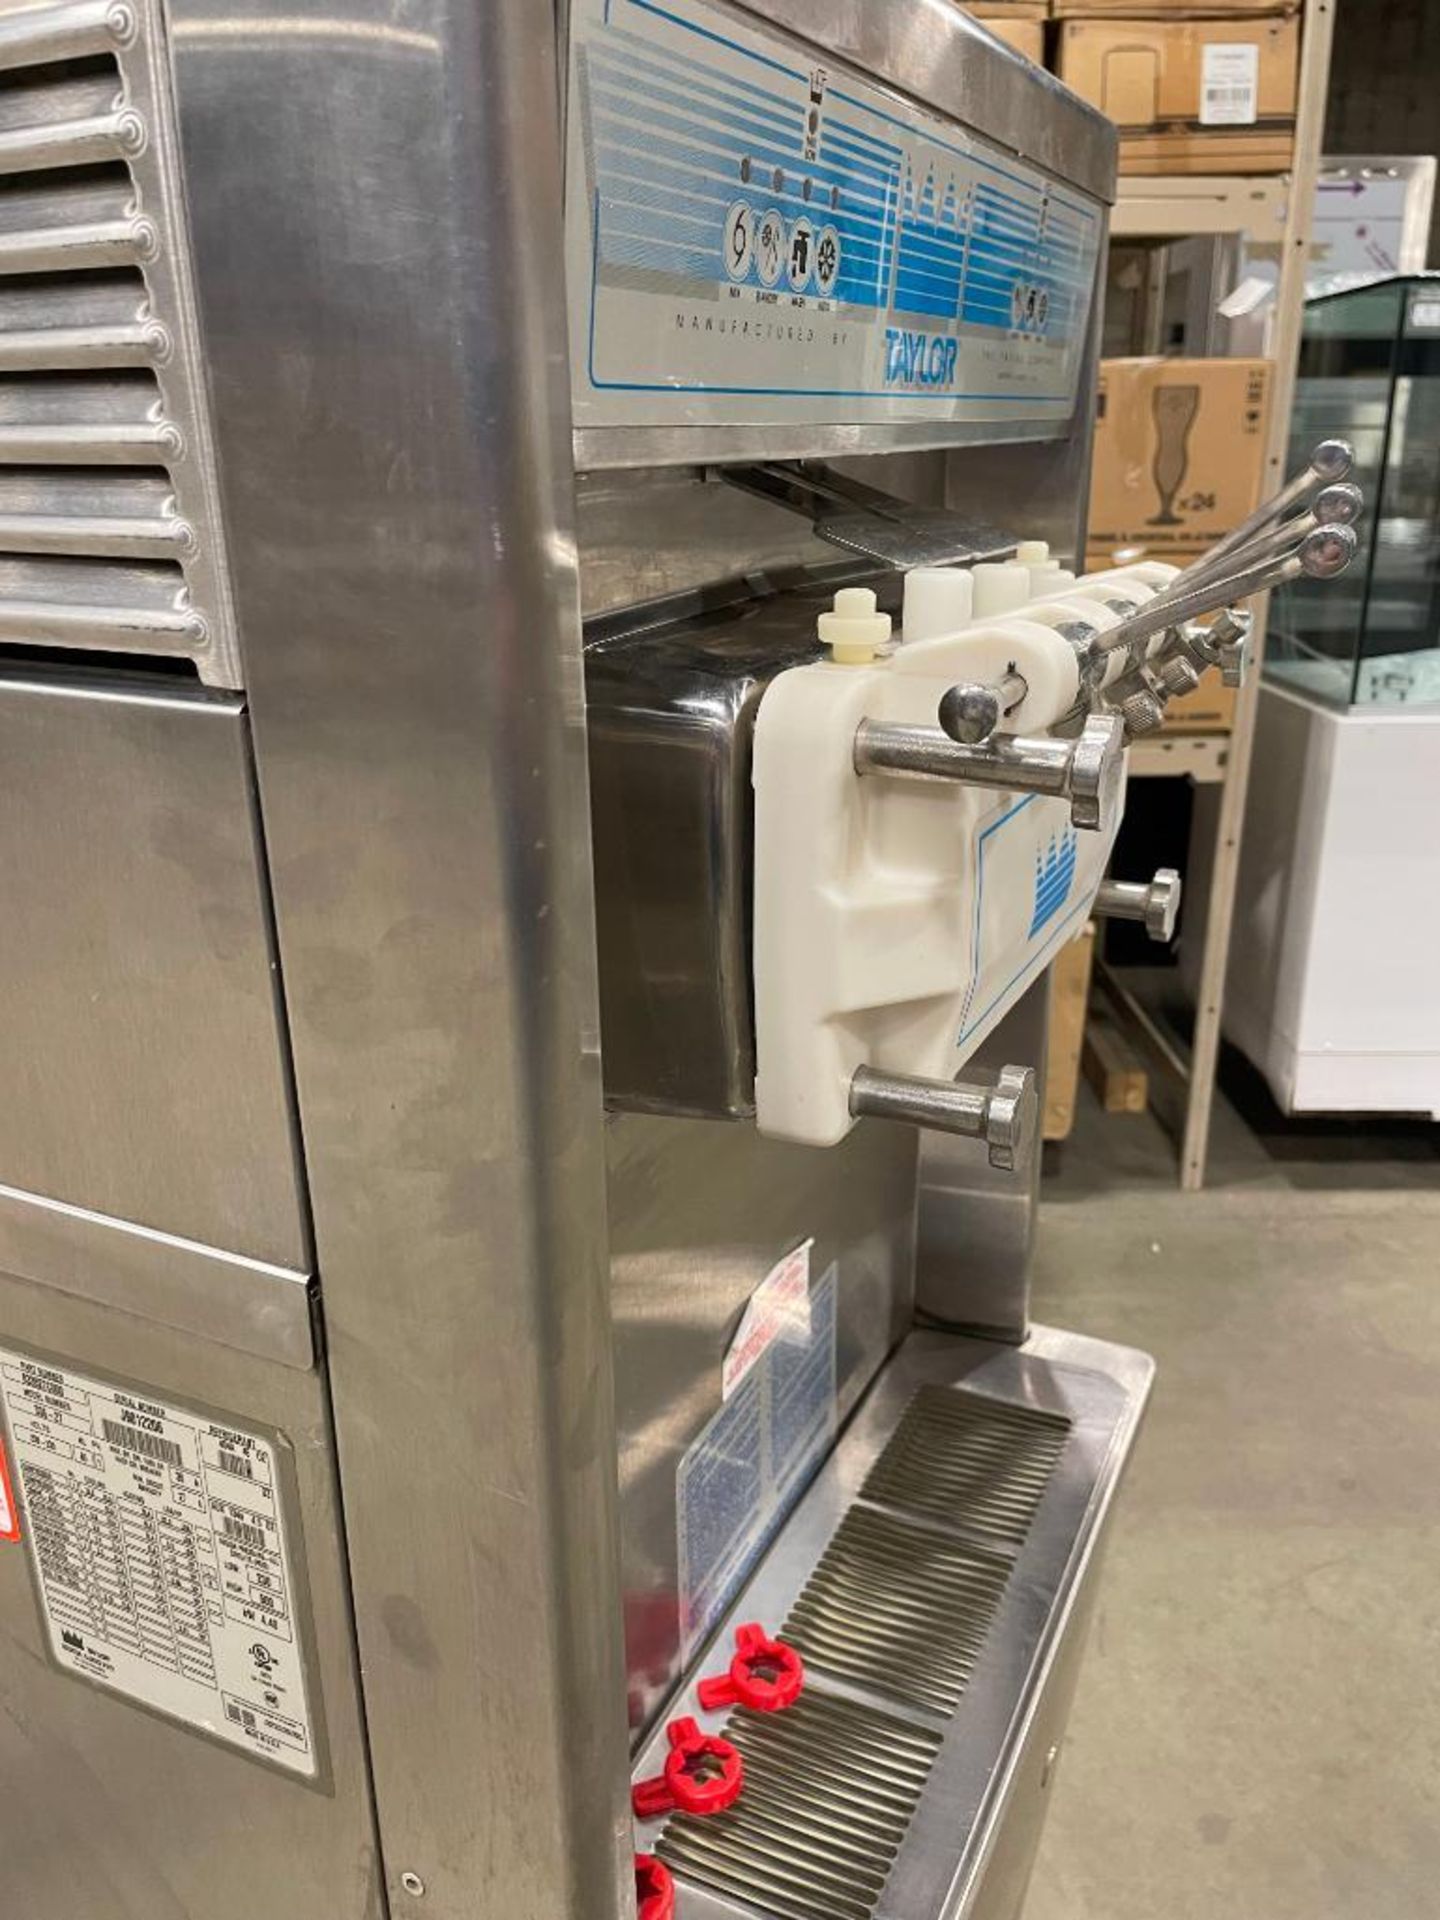 TAYLOR 336-27 AIR COOLED SOFT SERVE ICE CREAM MACHINE - Image 13 of 13